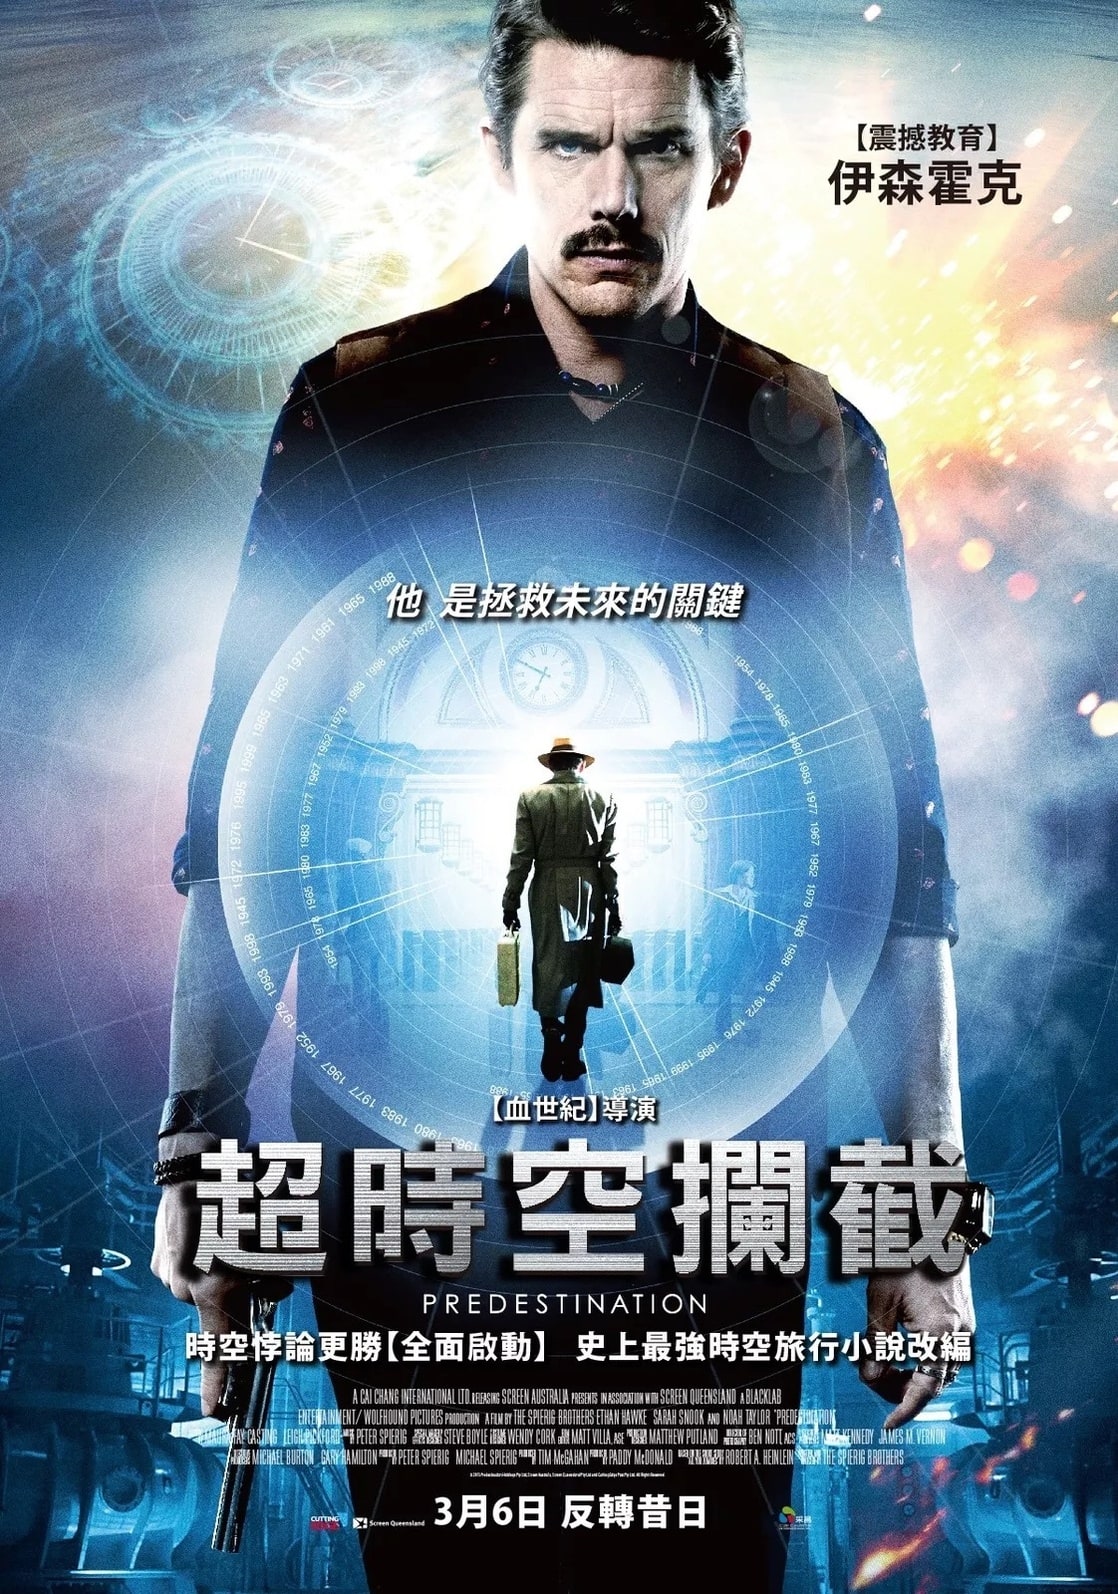 Predestination Is An Unusual Time Travel Film That's Never What You Expect